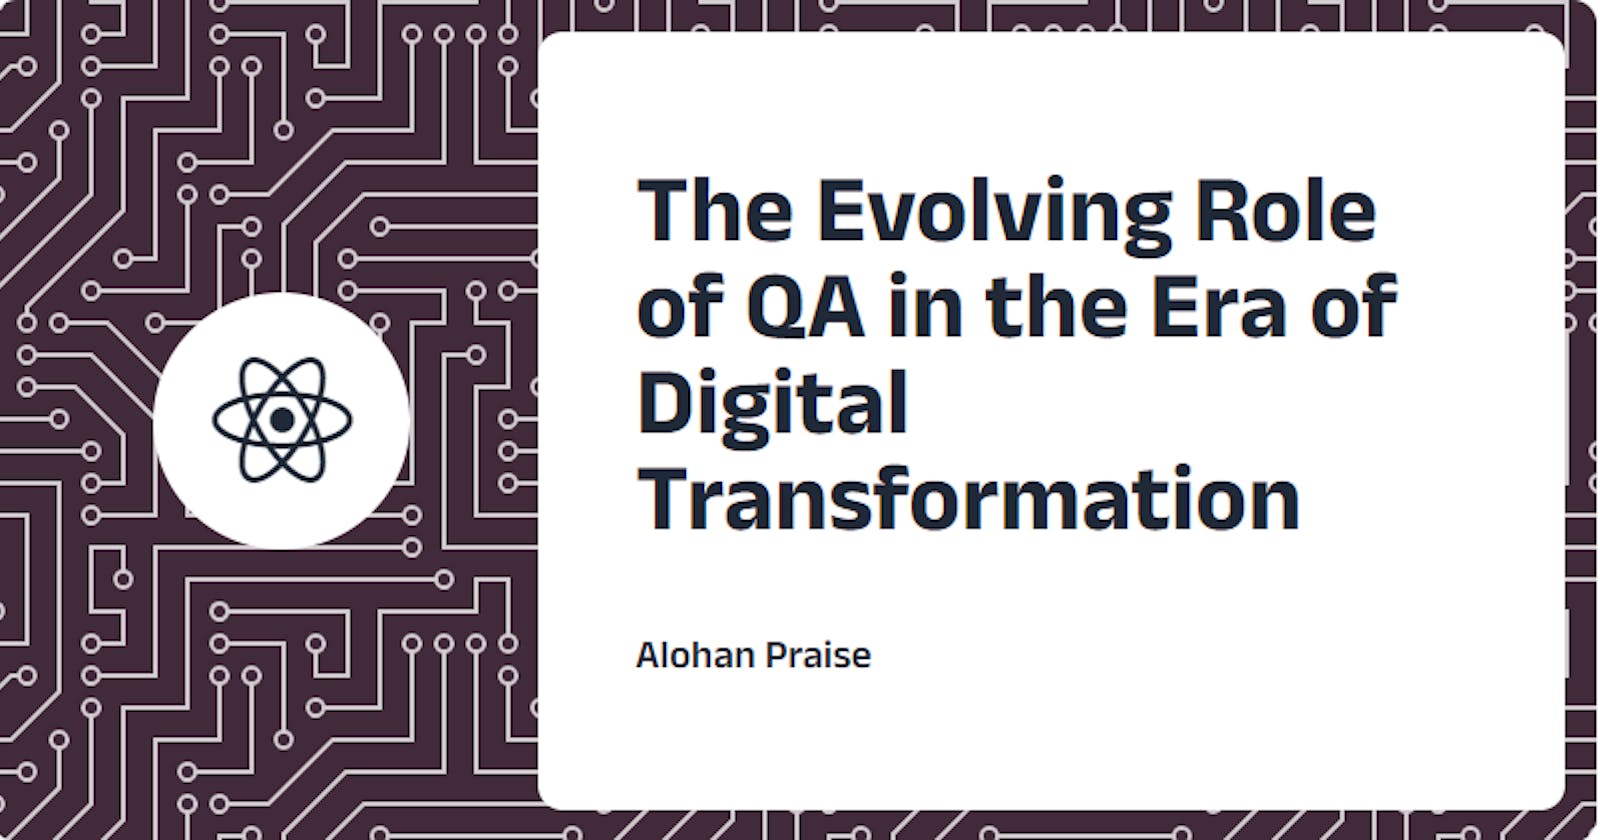 The Evolving Role of QA in the Era of Digital Transformation